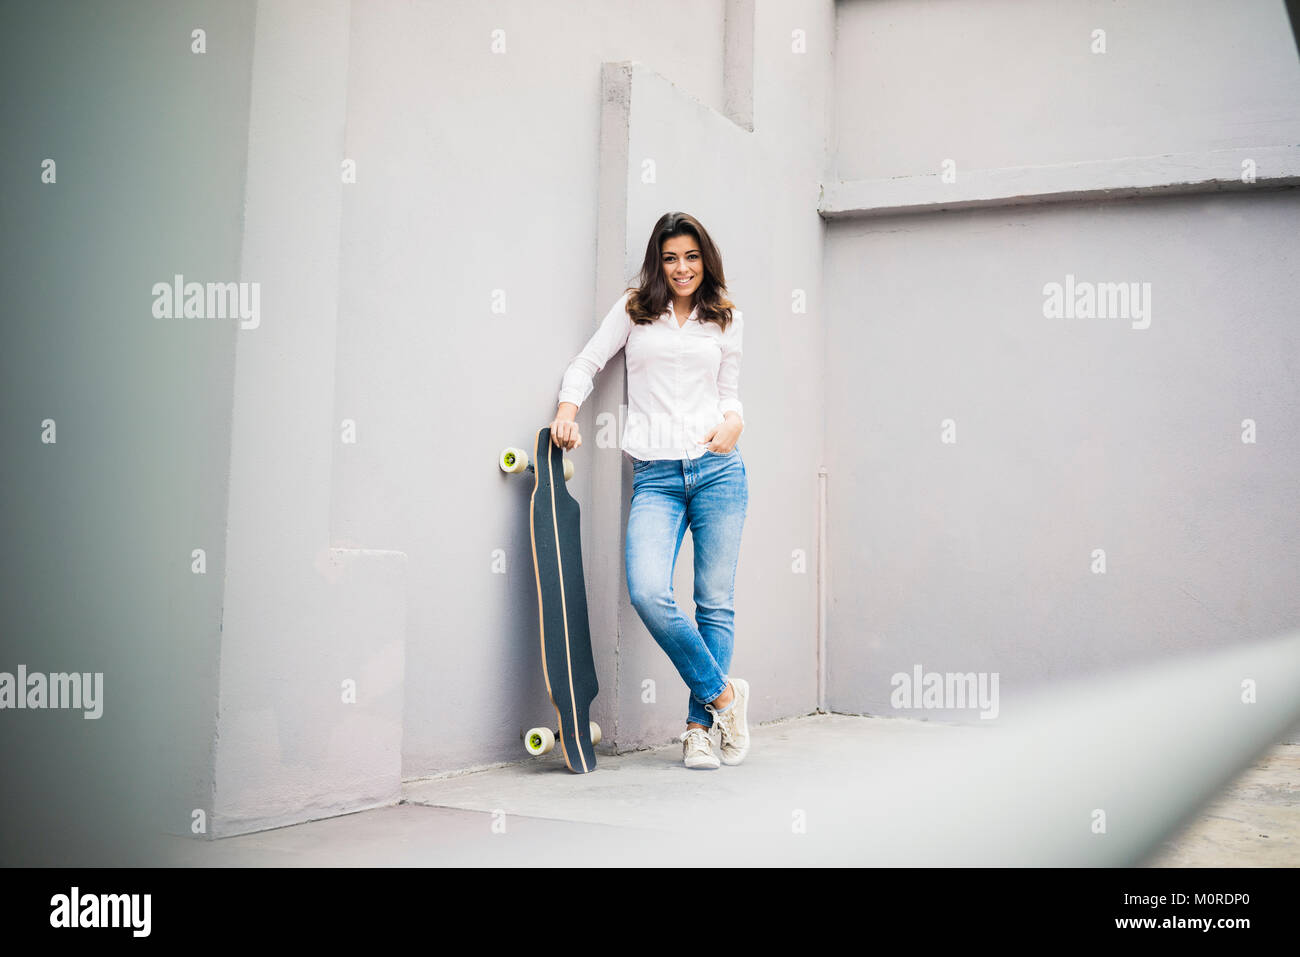 Smiling young woman with skateboard leaning against wall sur terrasse Banque D'Images